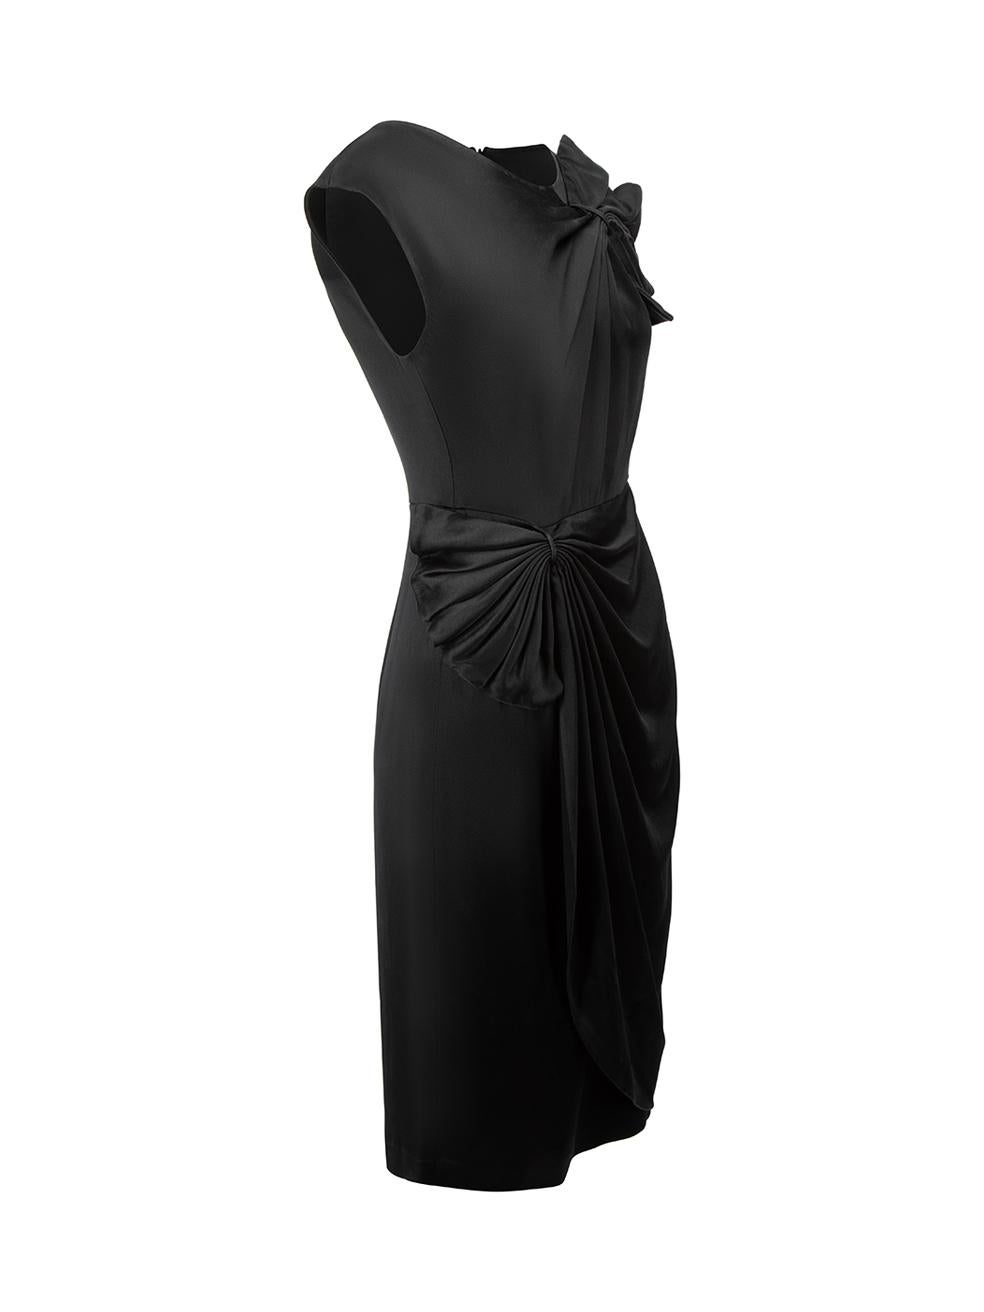 CONDITION is Good. Minor wear to dress is evident. Light wear to the weave of fabric with plucking to the neck-edge on this used 3.1 Philip Lim designer resale item. 



Details


Black

Silk

Knee length

Round neckline

Gathered asymmetric bow